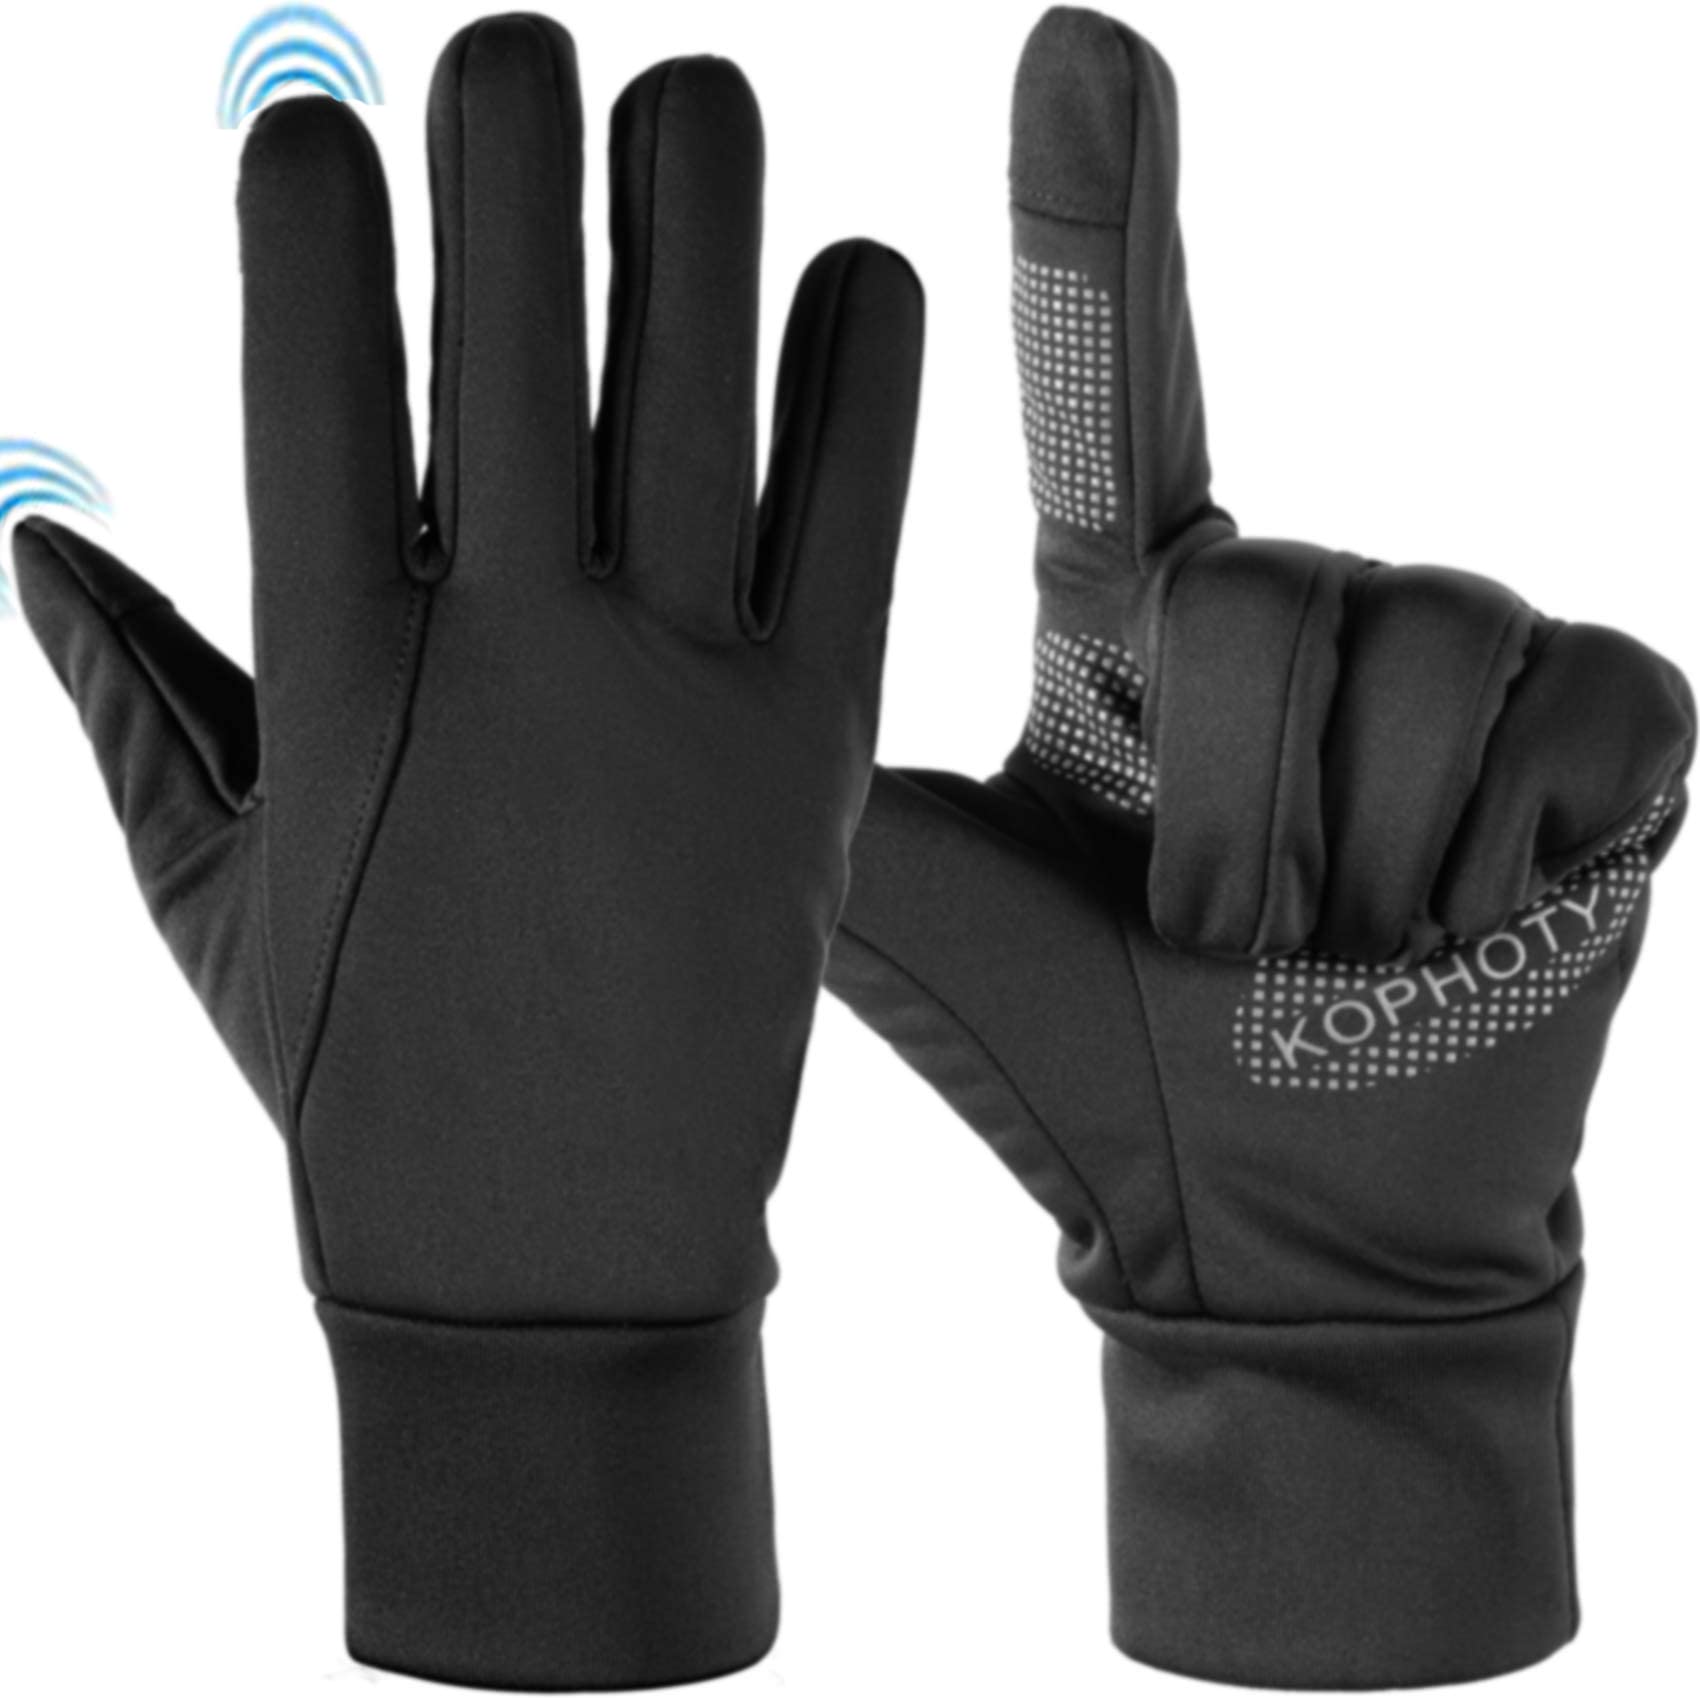  Mens Gloves Winter Touchscreen Texting Phone Windproof Driving  Motorcycle Gloves for Men Fleece Lined Warm Gloves (Black, M) : Clothing,  Shoes & Jewelry